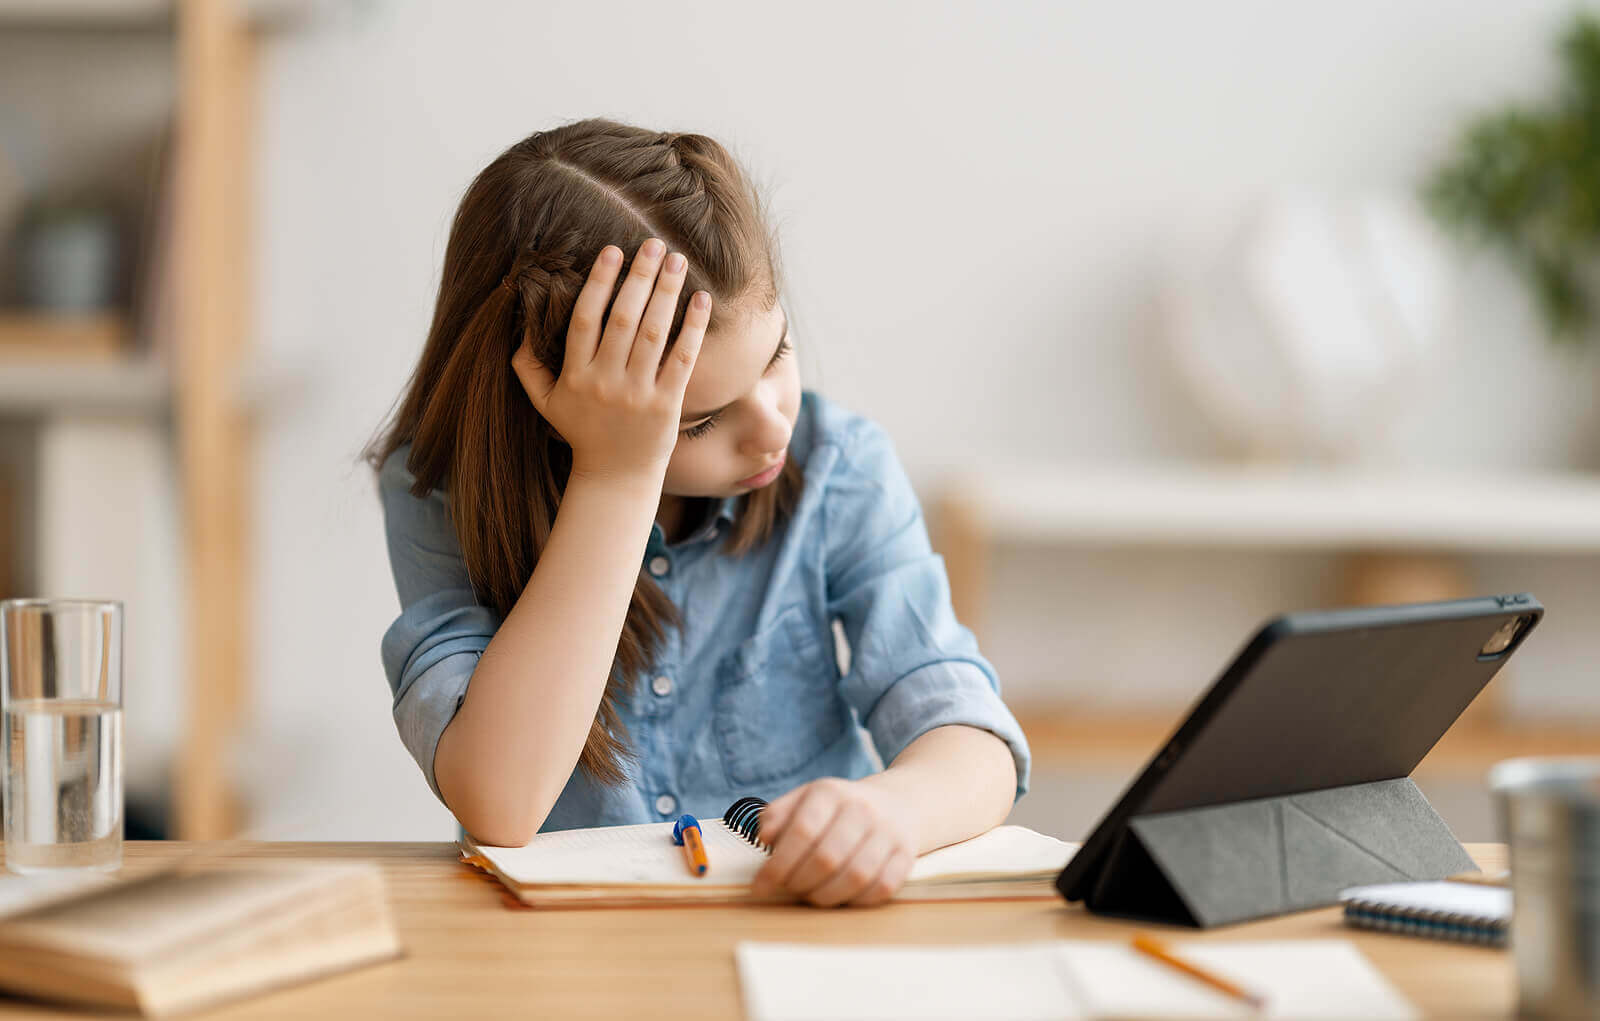 What to Do when Children Refuse to Do Homework